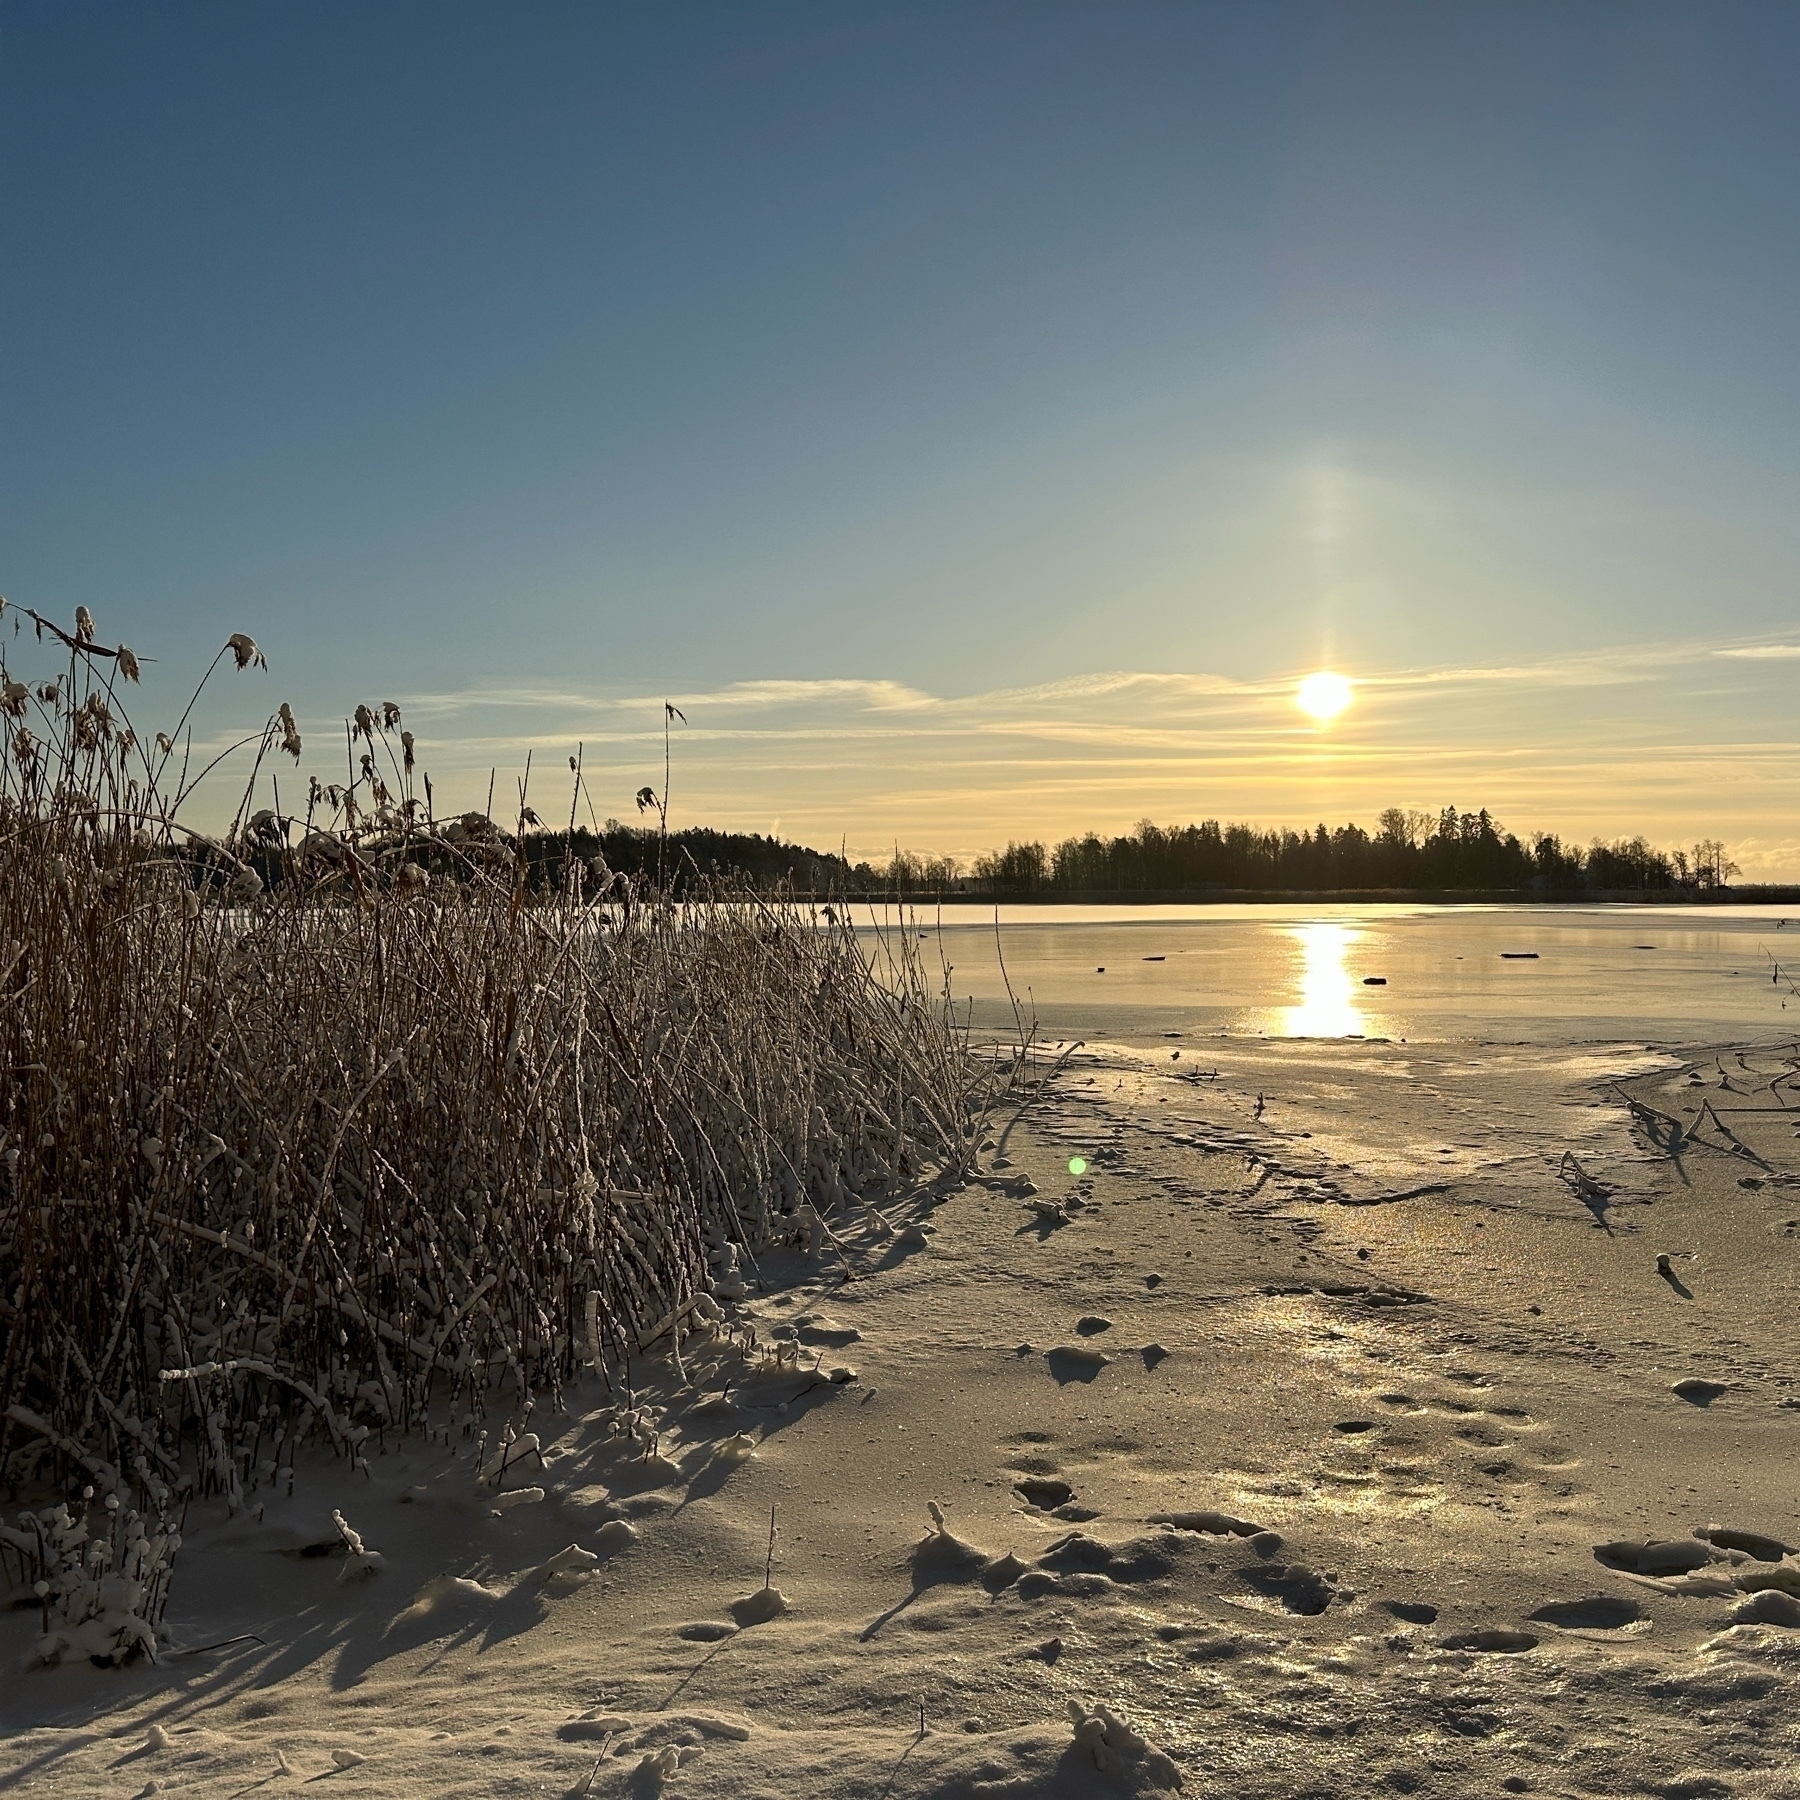 snow covered reeds by the sea, thinly frozen sea and sun piercing through clear skies